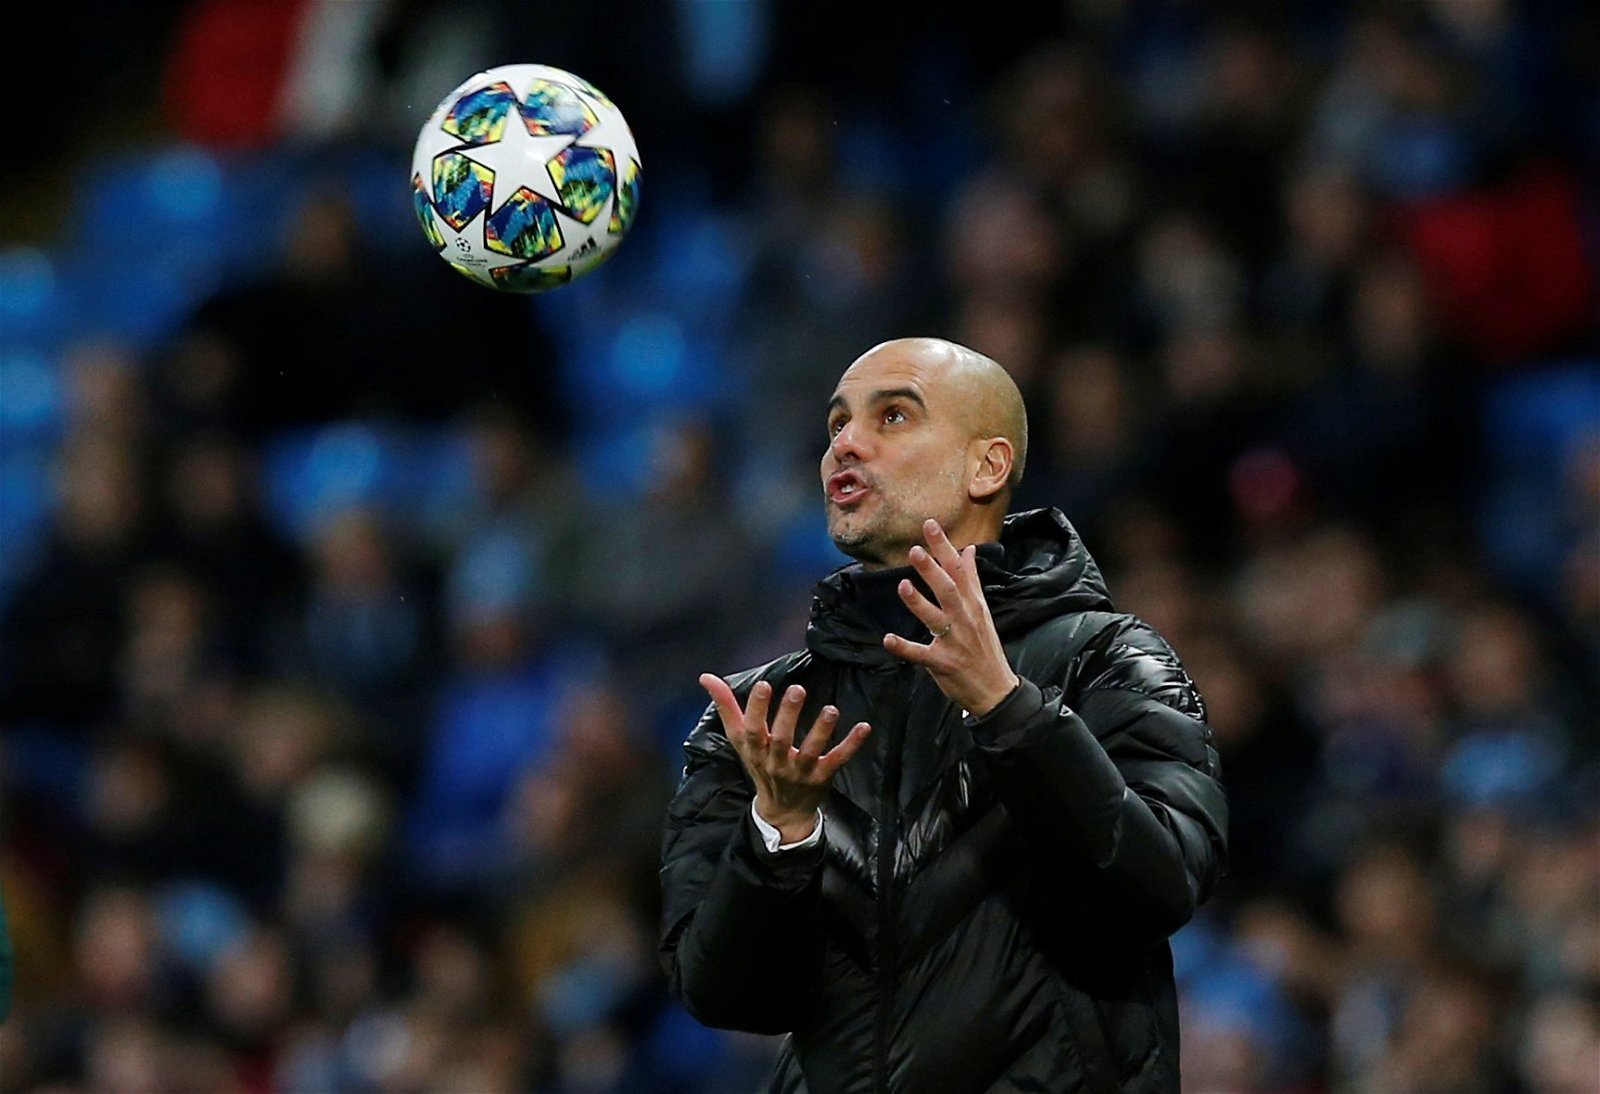 Pep Guardiola launches into fanatical rant after City get ban overturned